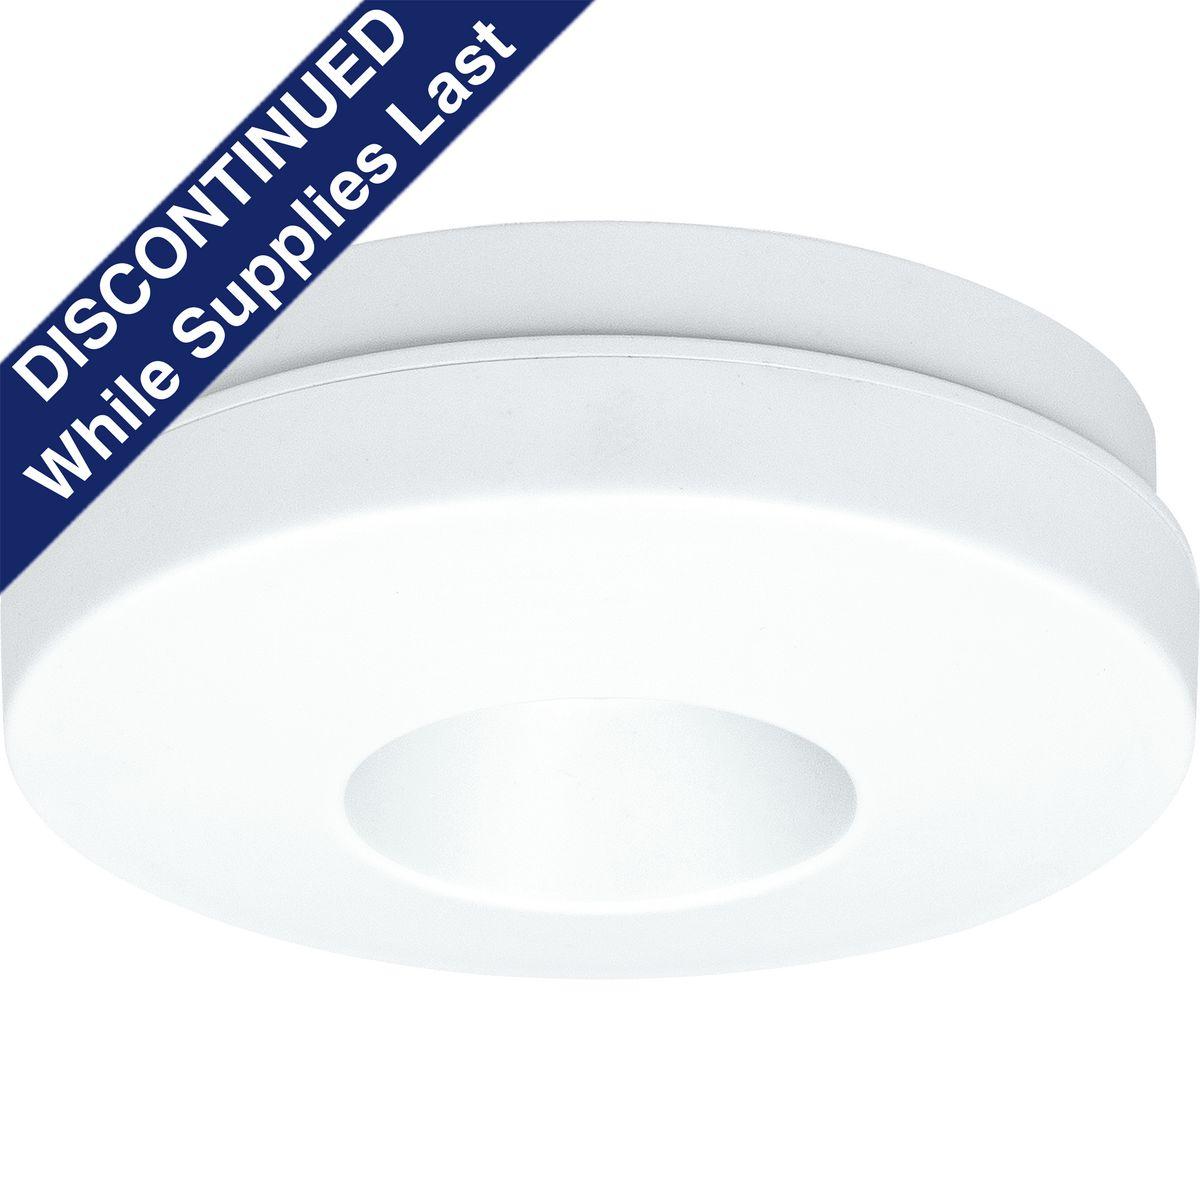 Hubbell P700005-028-30 The Hide-a-Lite V LED Puck provides an ideal solution for many applications. The low profile design provides versatility to allow installations inside a cabinet, under a cabinet and above a cabinet to provide up light. The Hide-a-Lite V LED Puck offers a 